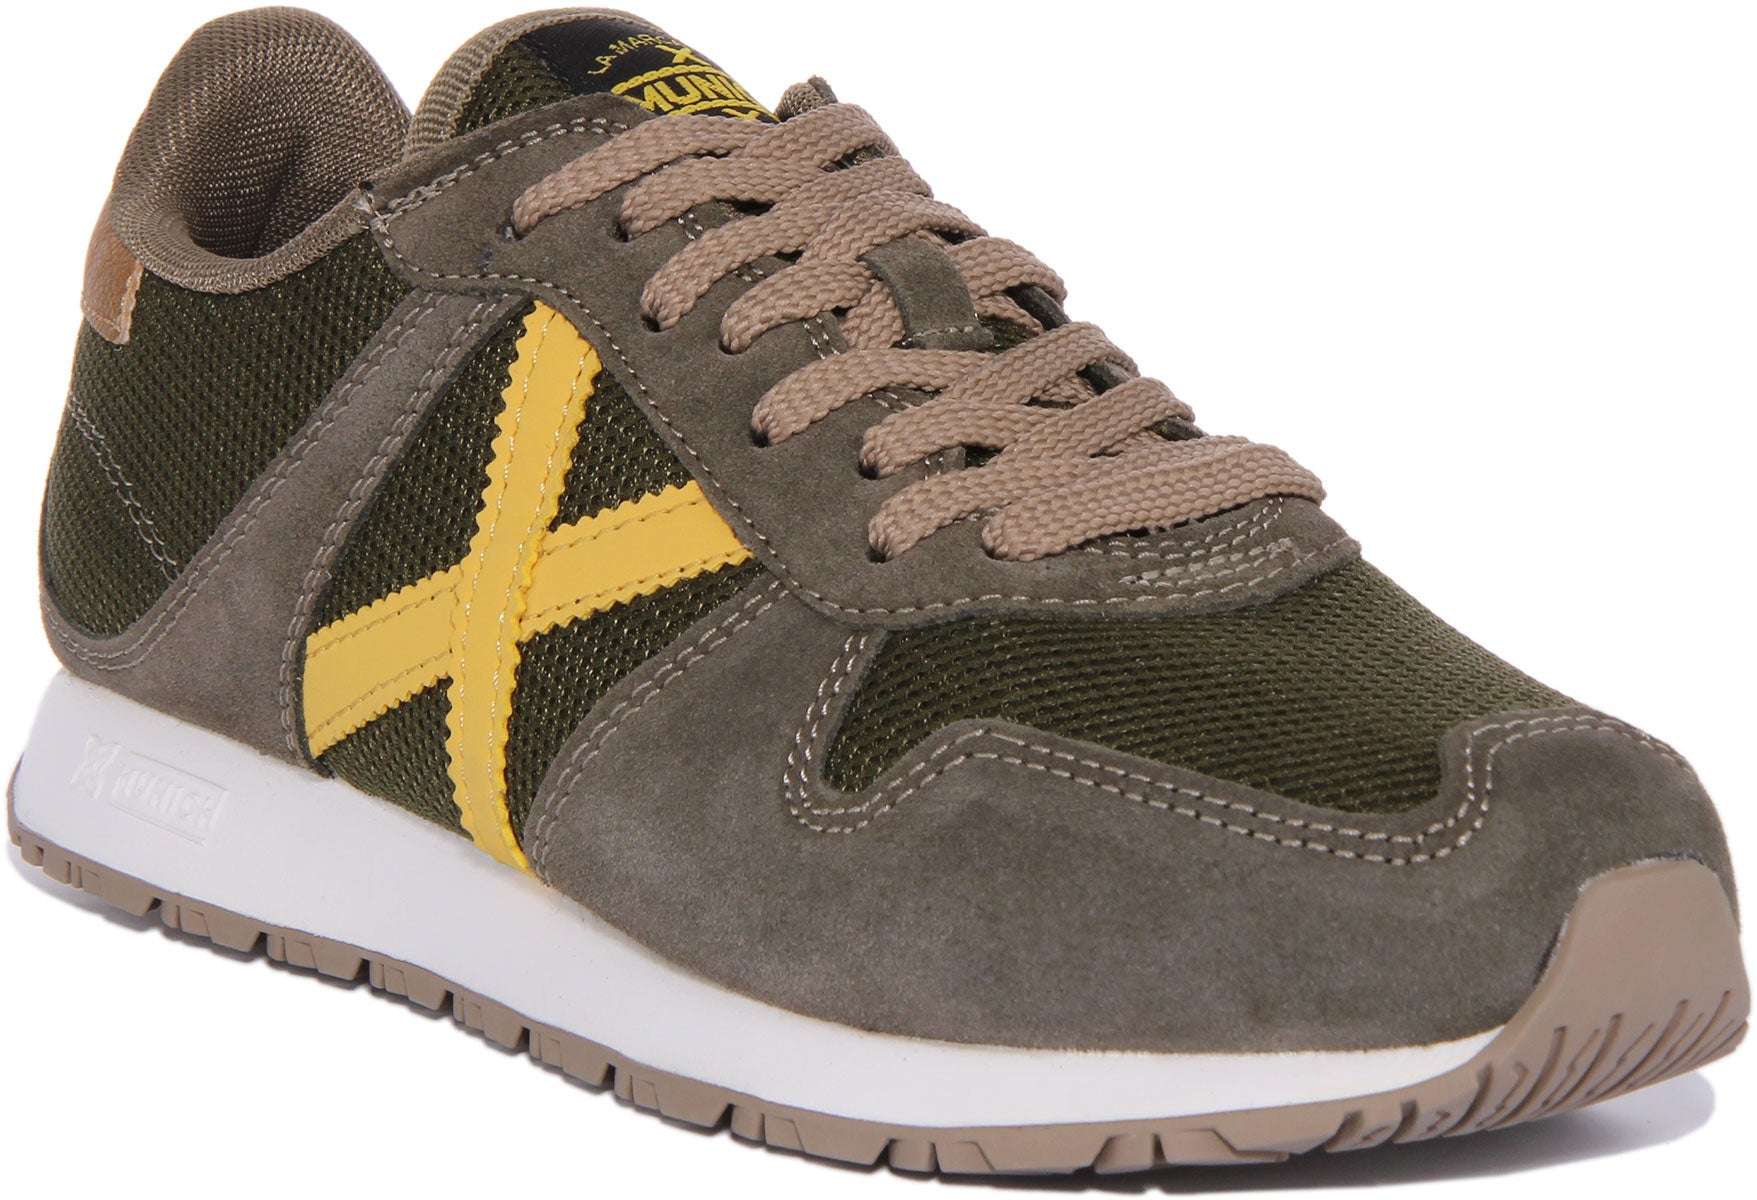 Munich Massana 484 In Green For Men Casual up Trainers 4feetshoes